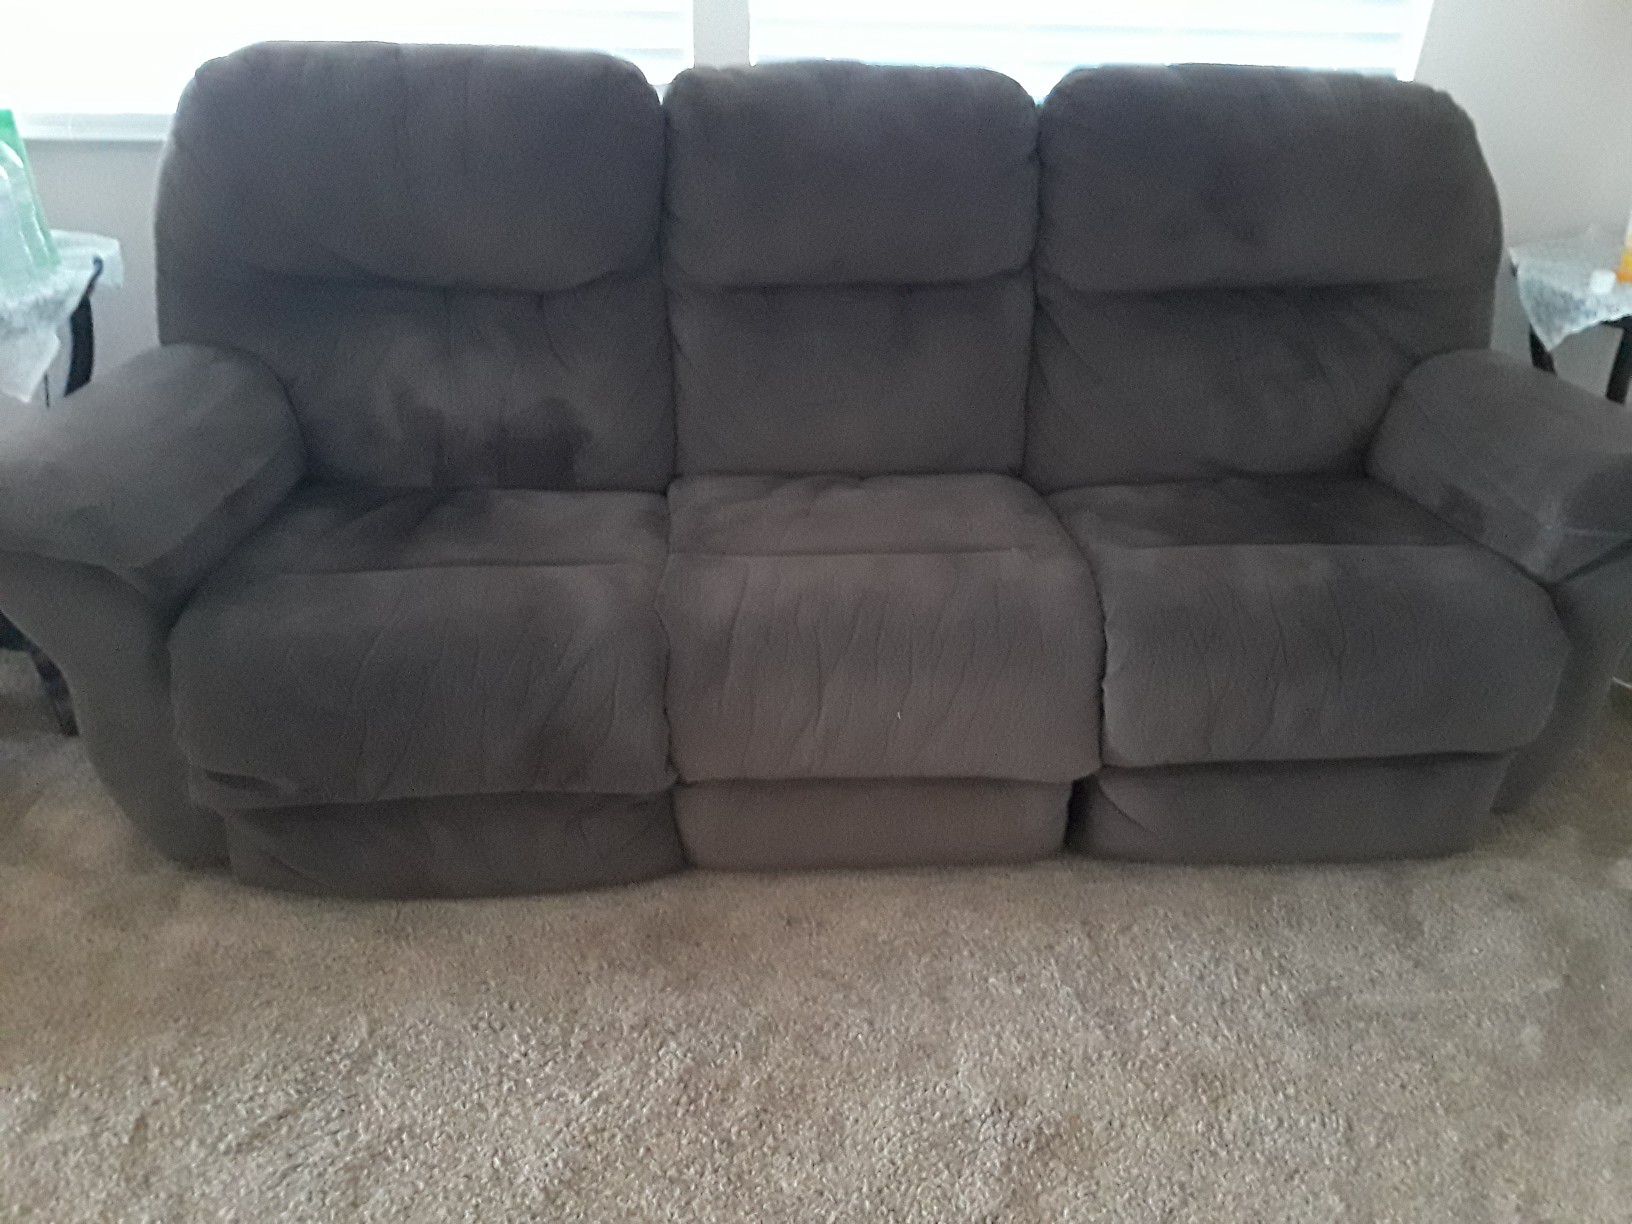 Suede brown 7 ft sofa